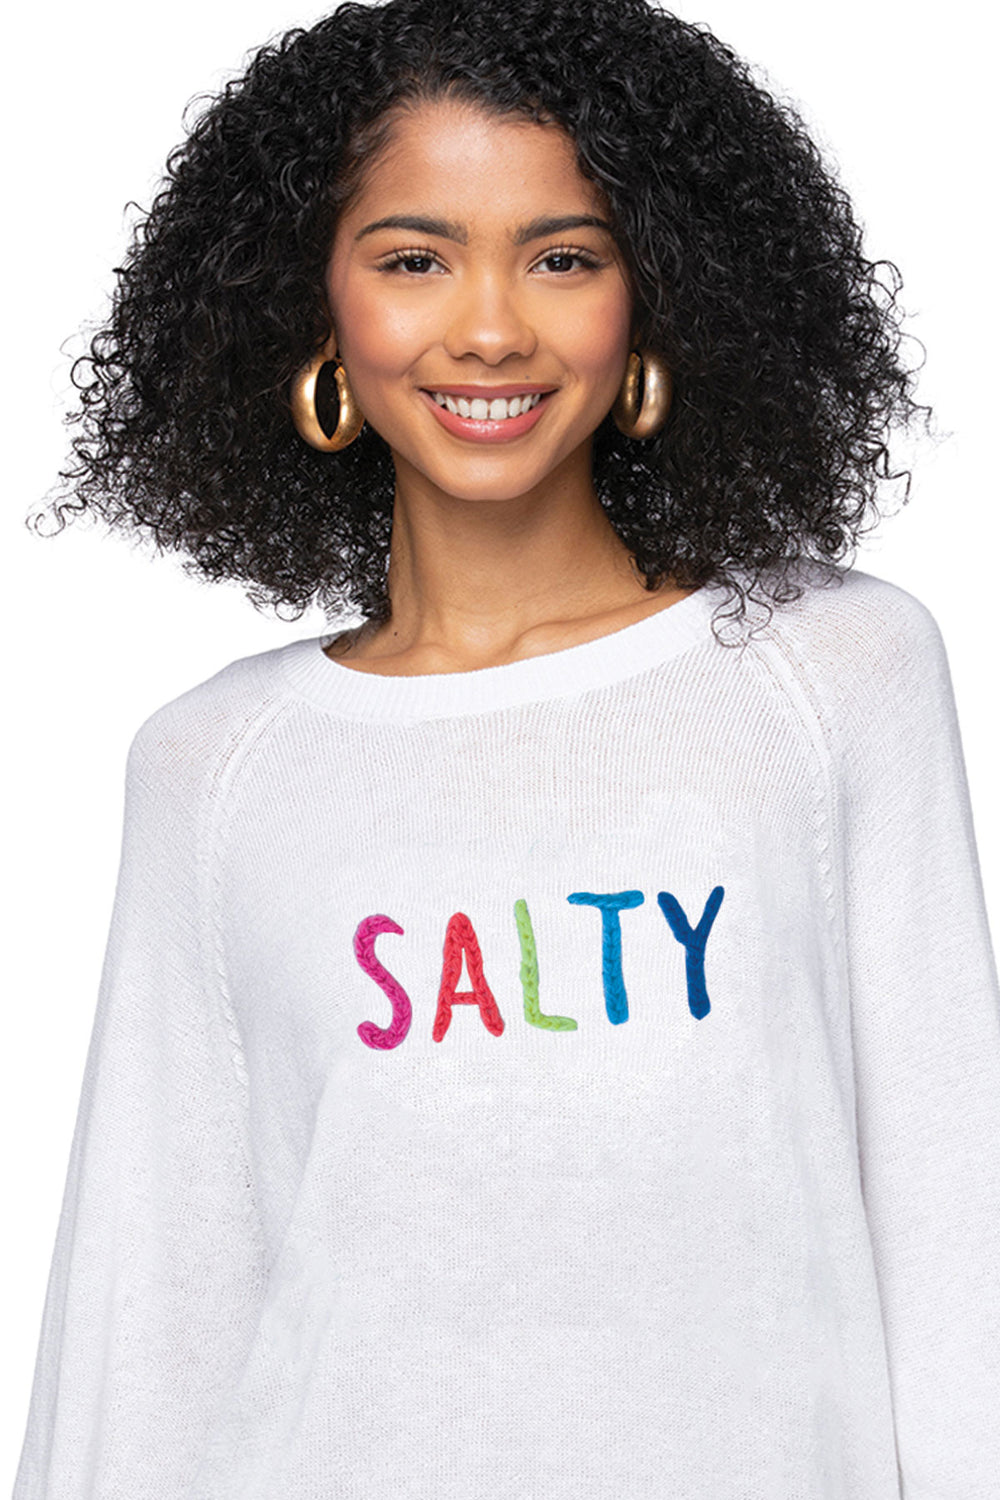 Eco Cotton Crew Sweater | SALTY Embroidery